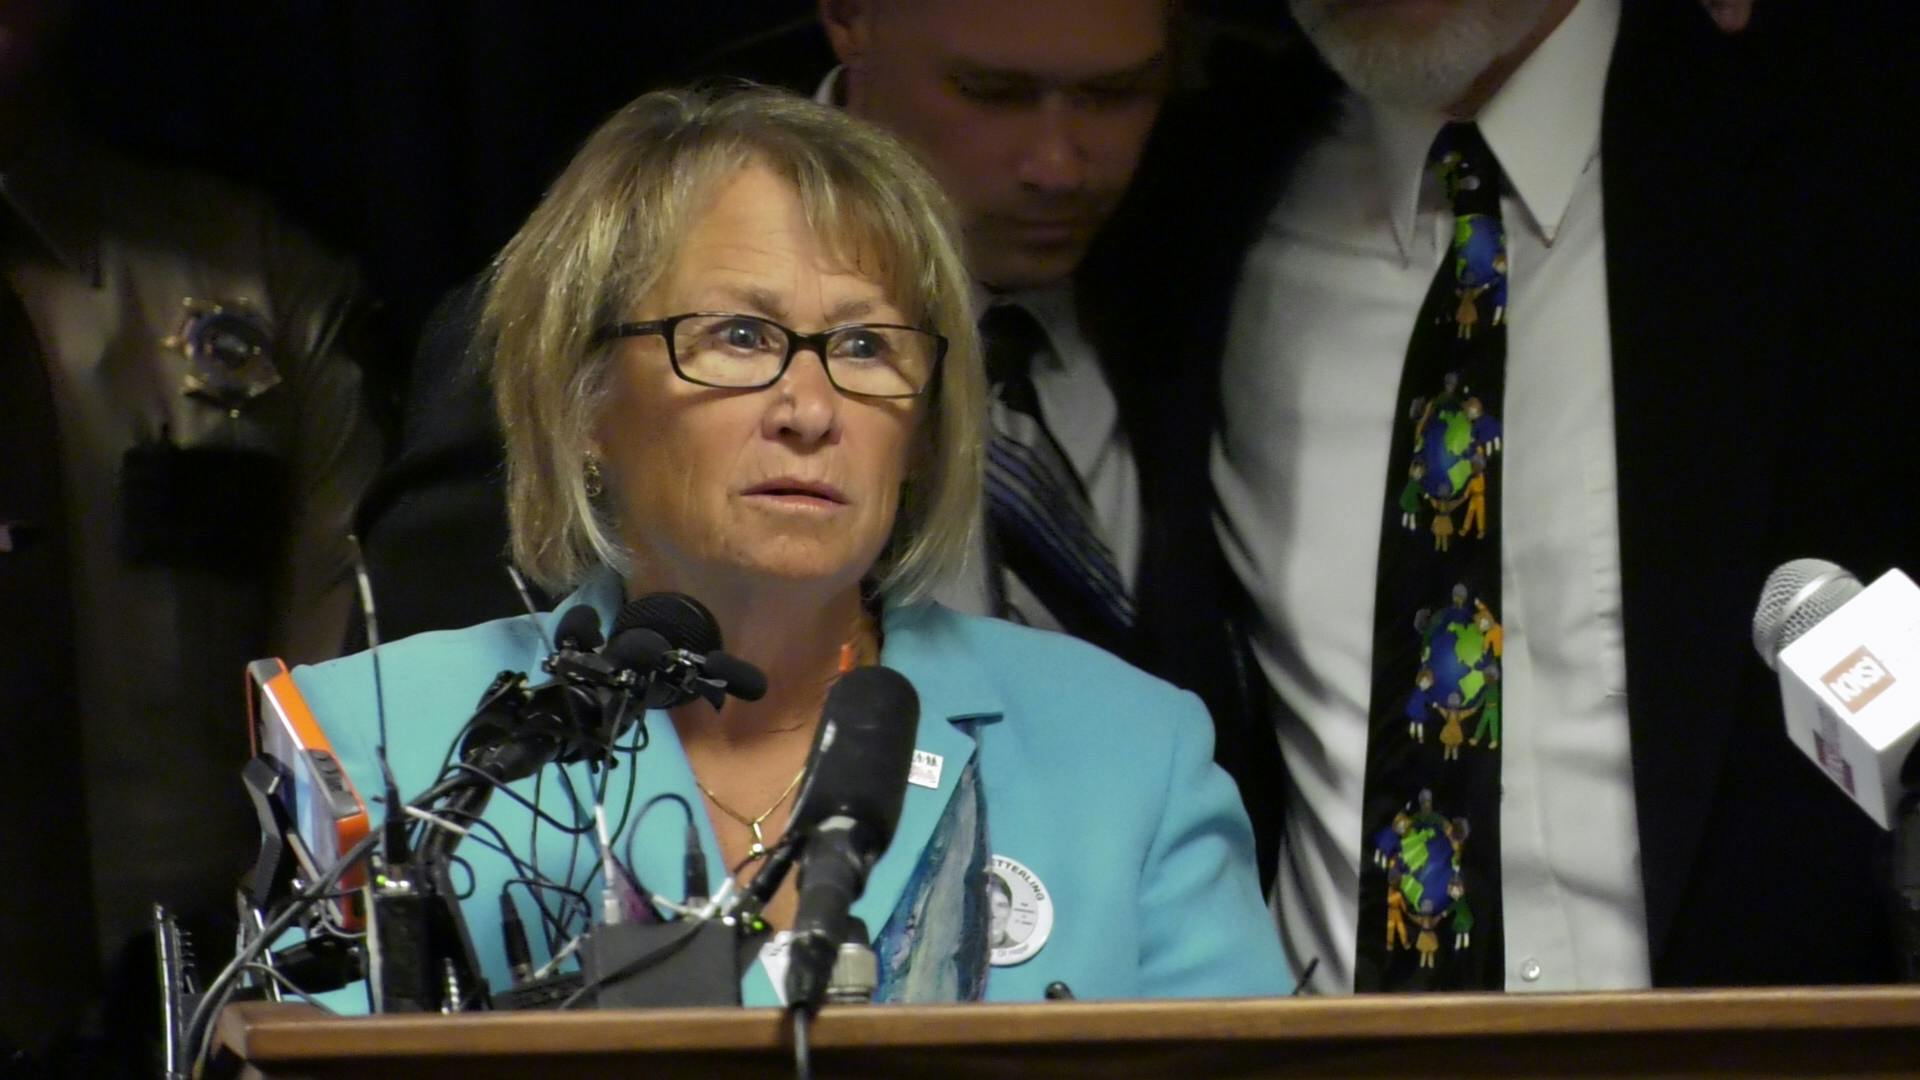 Shortly after learning about her son Jacob's last moments, Patty Wetterling spoke to the media